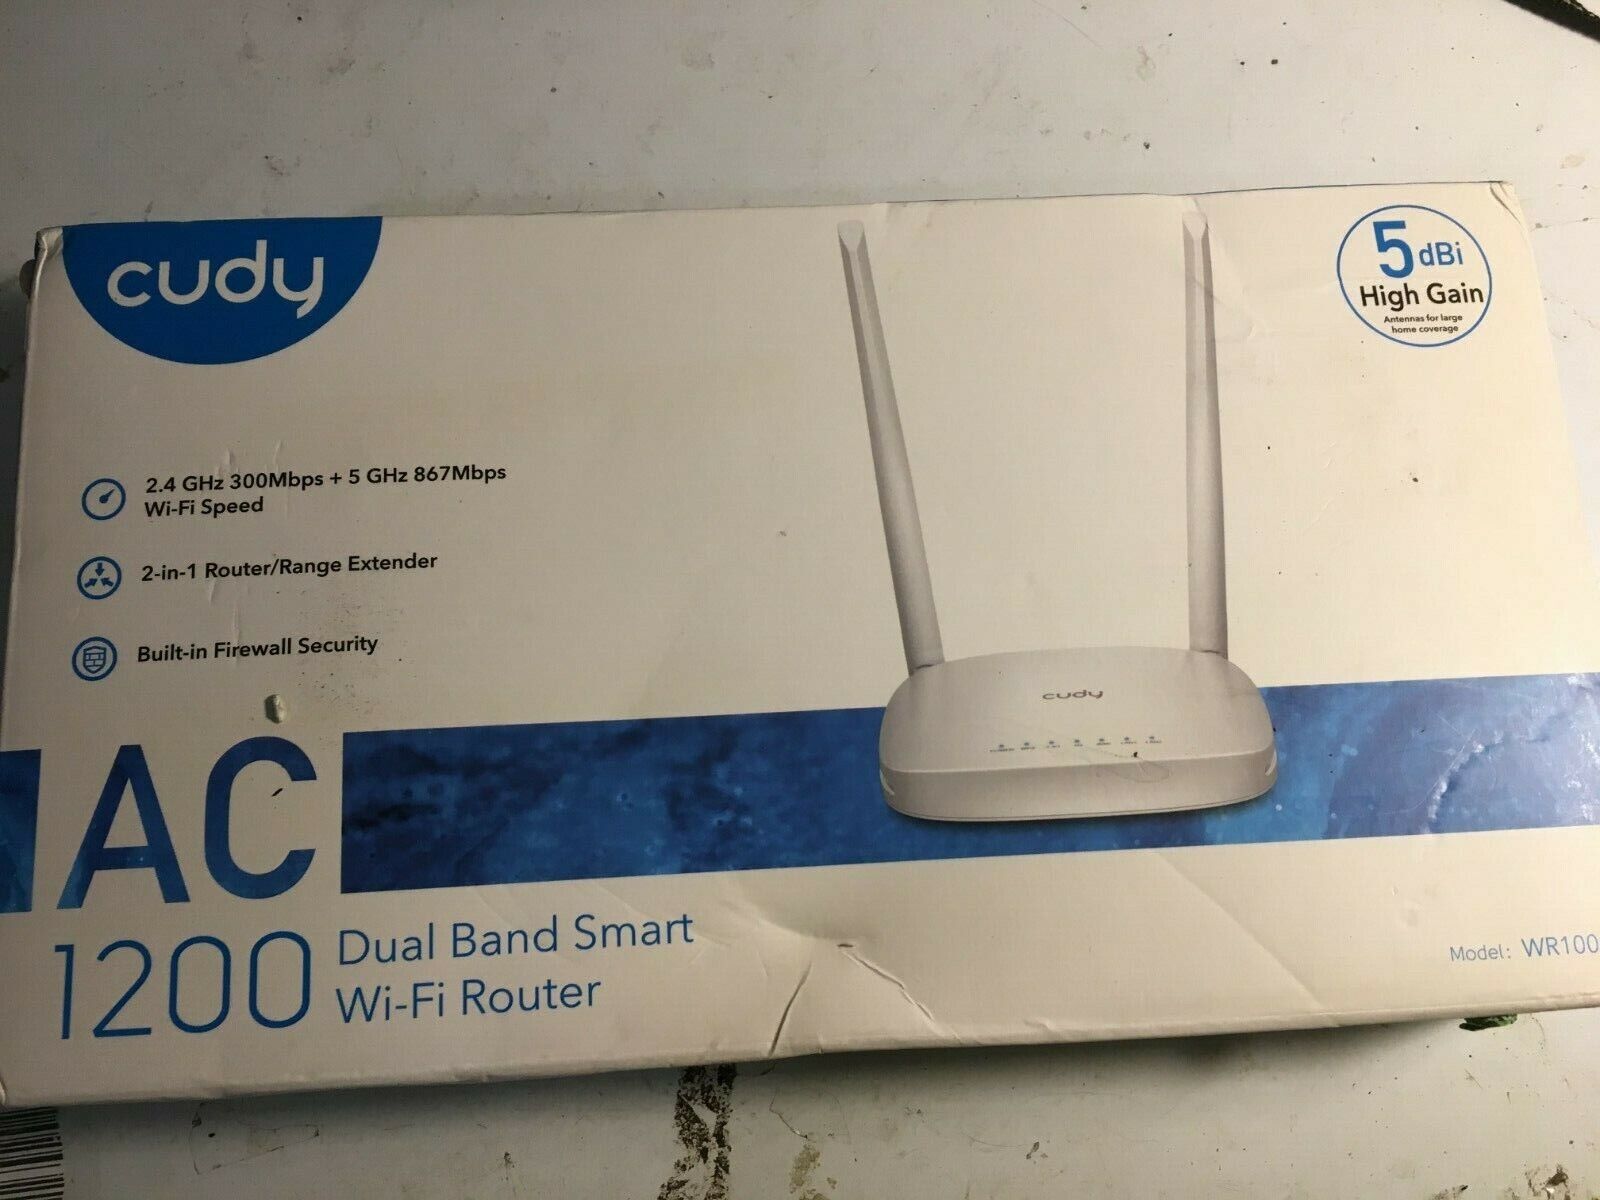 Cudy model wr1000 dual band smart wi fi router ac1200